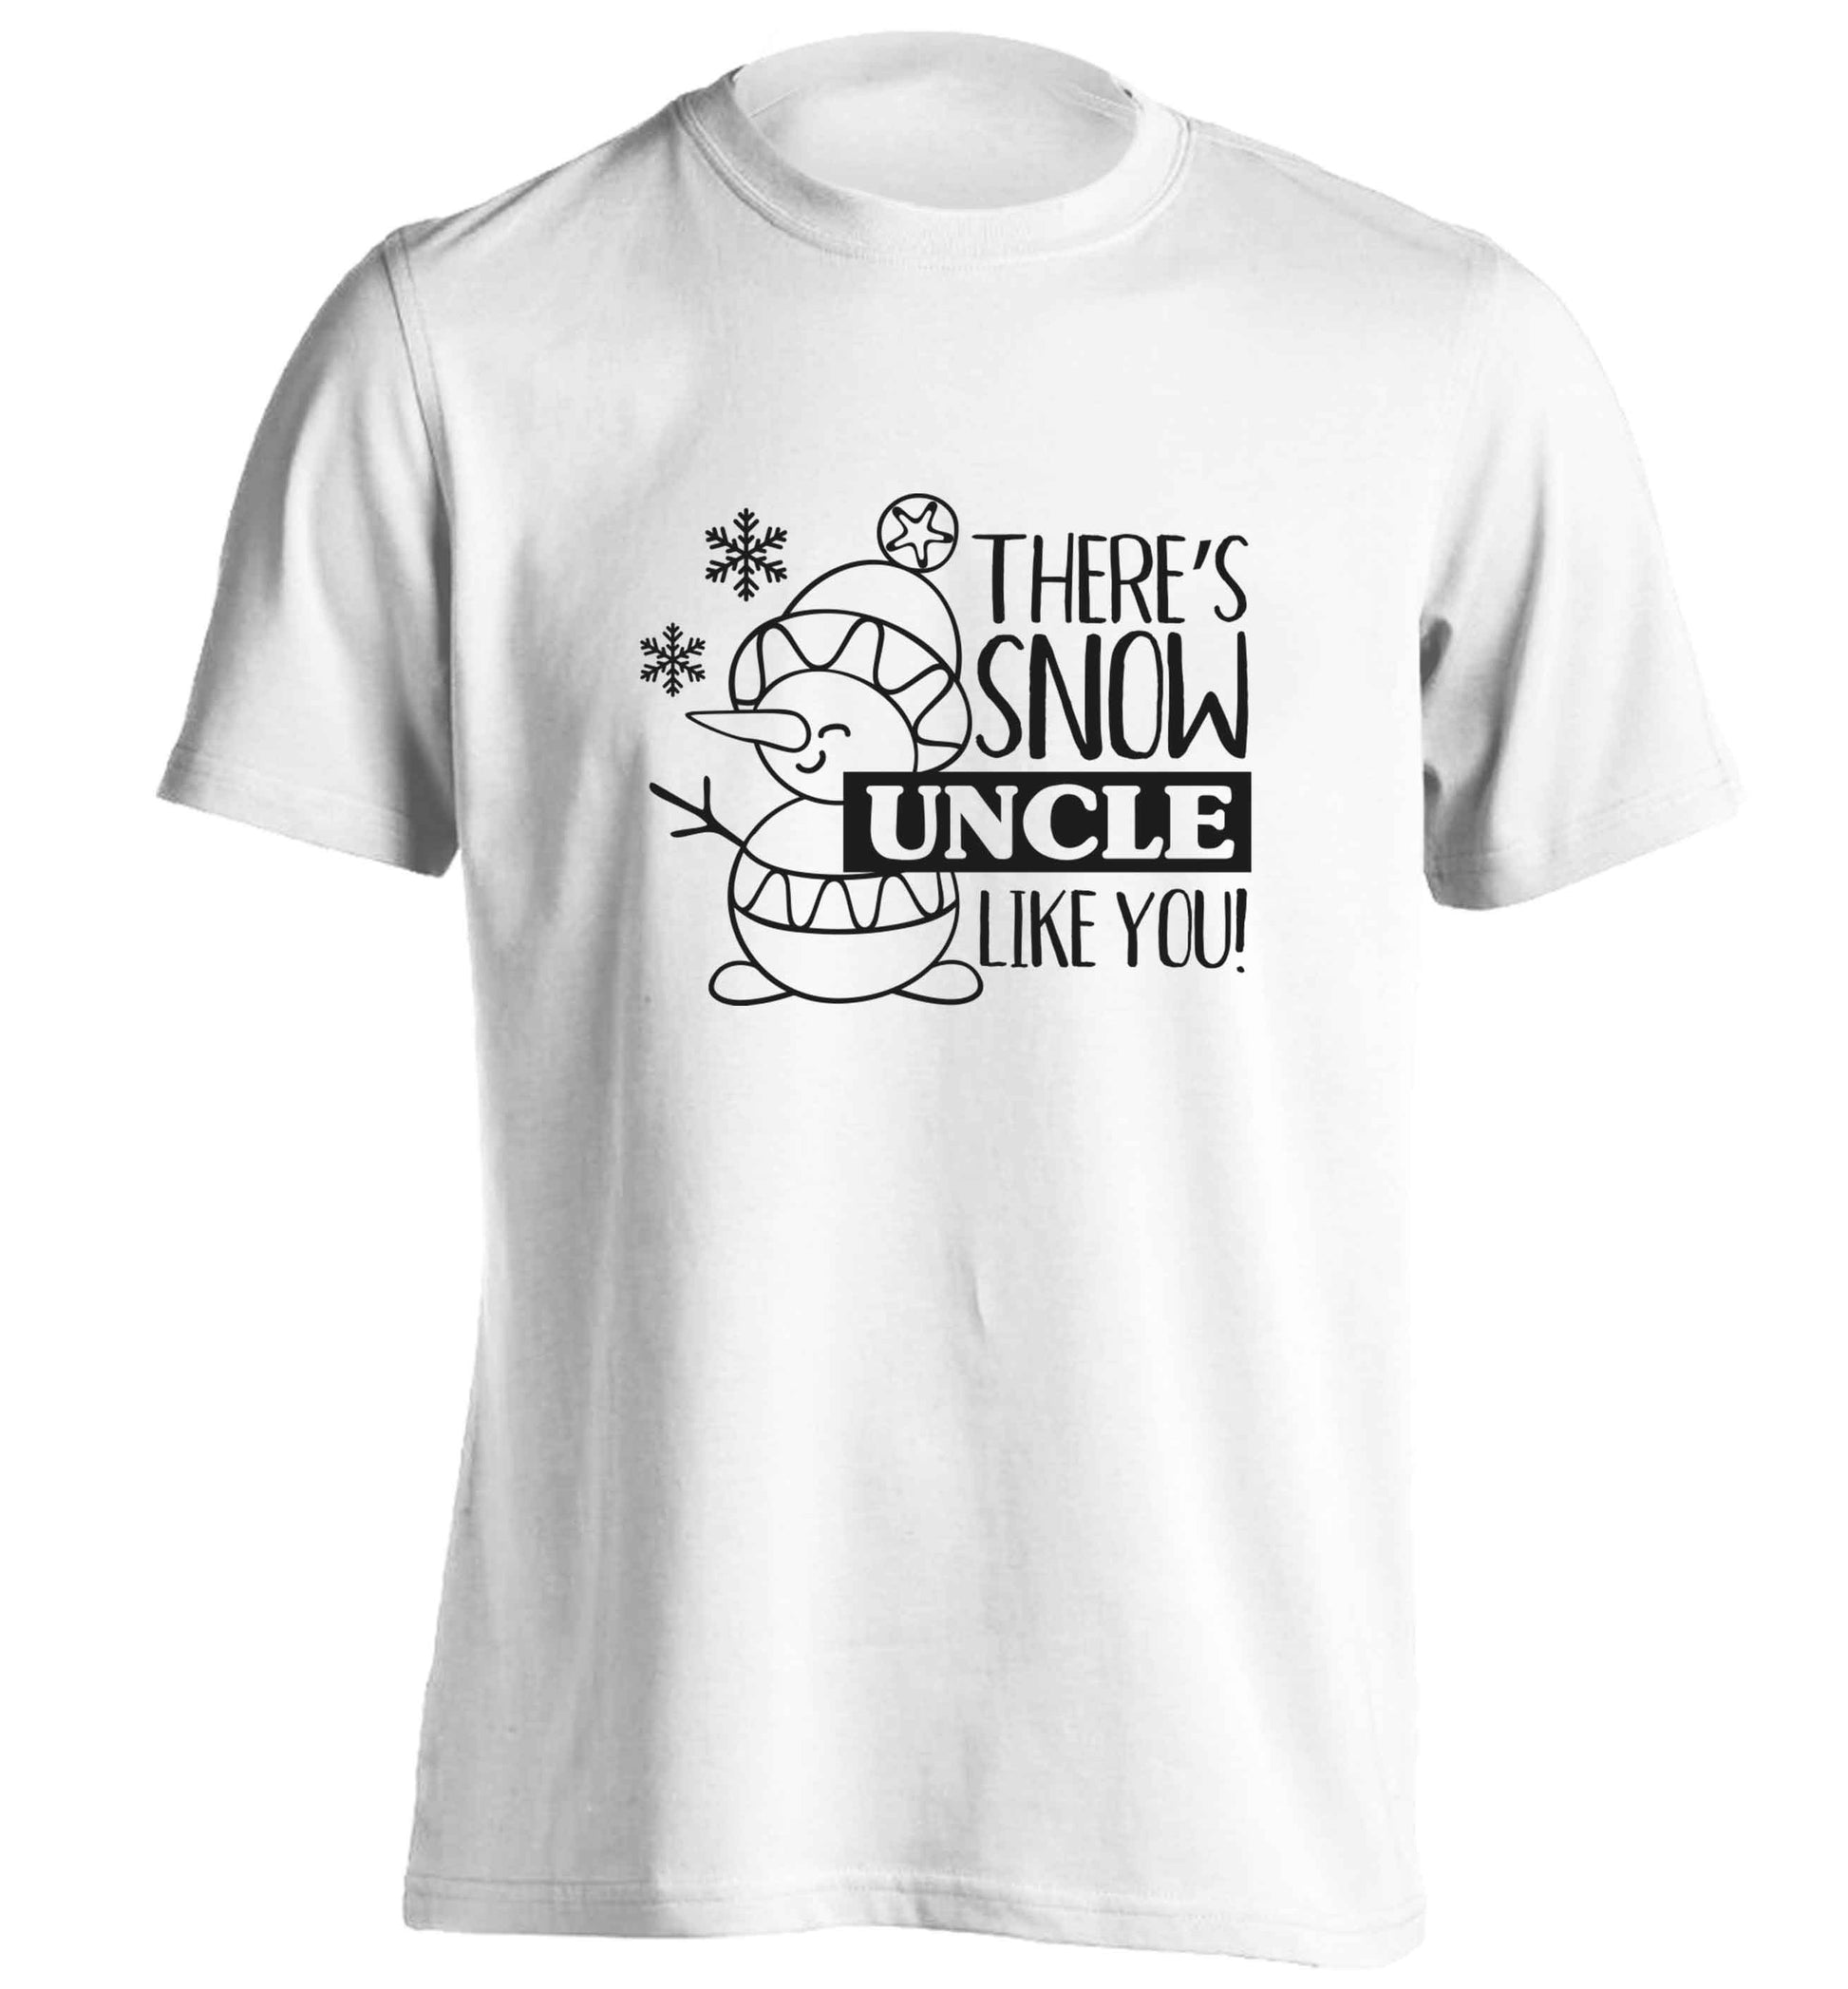 There's snow uncle like you adults unisex white Tshirt 2XL